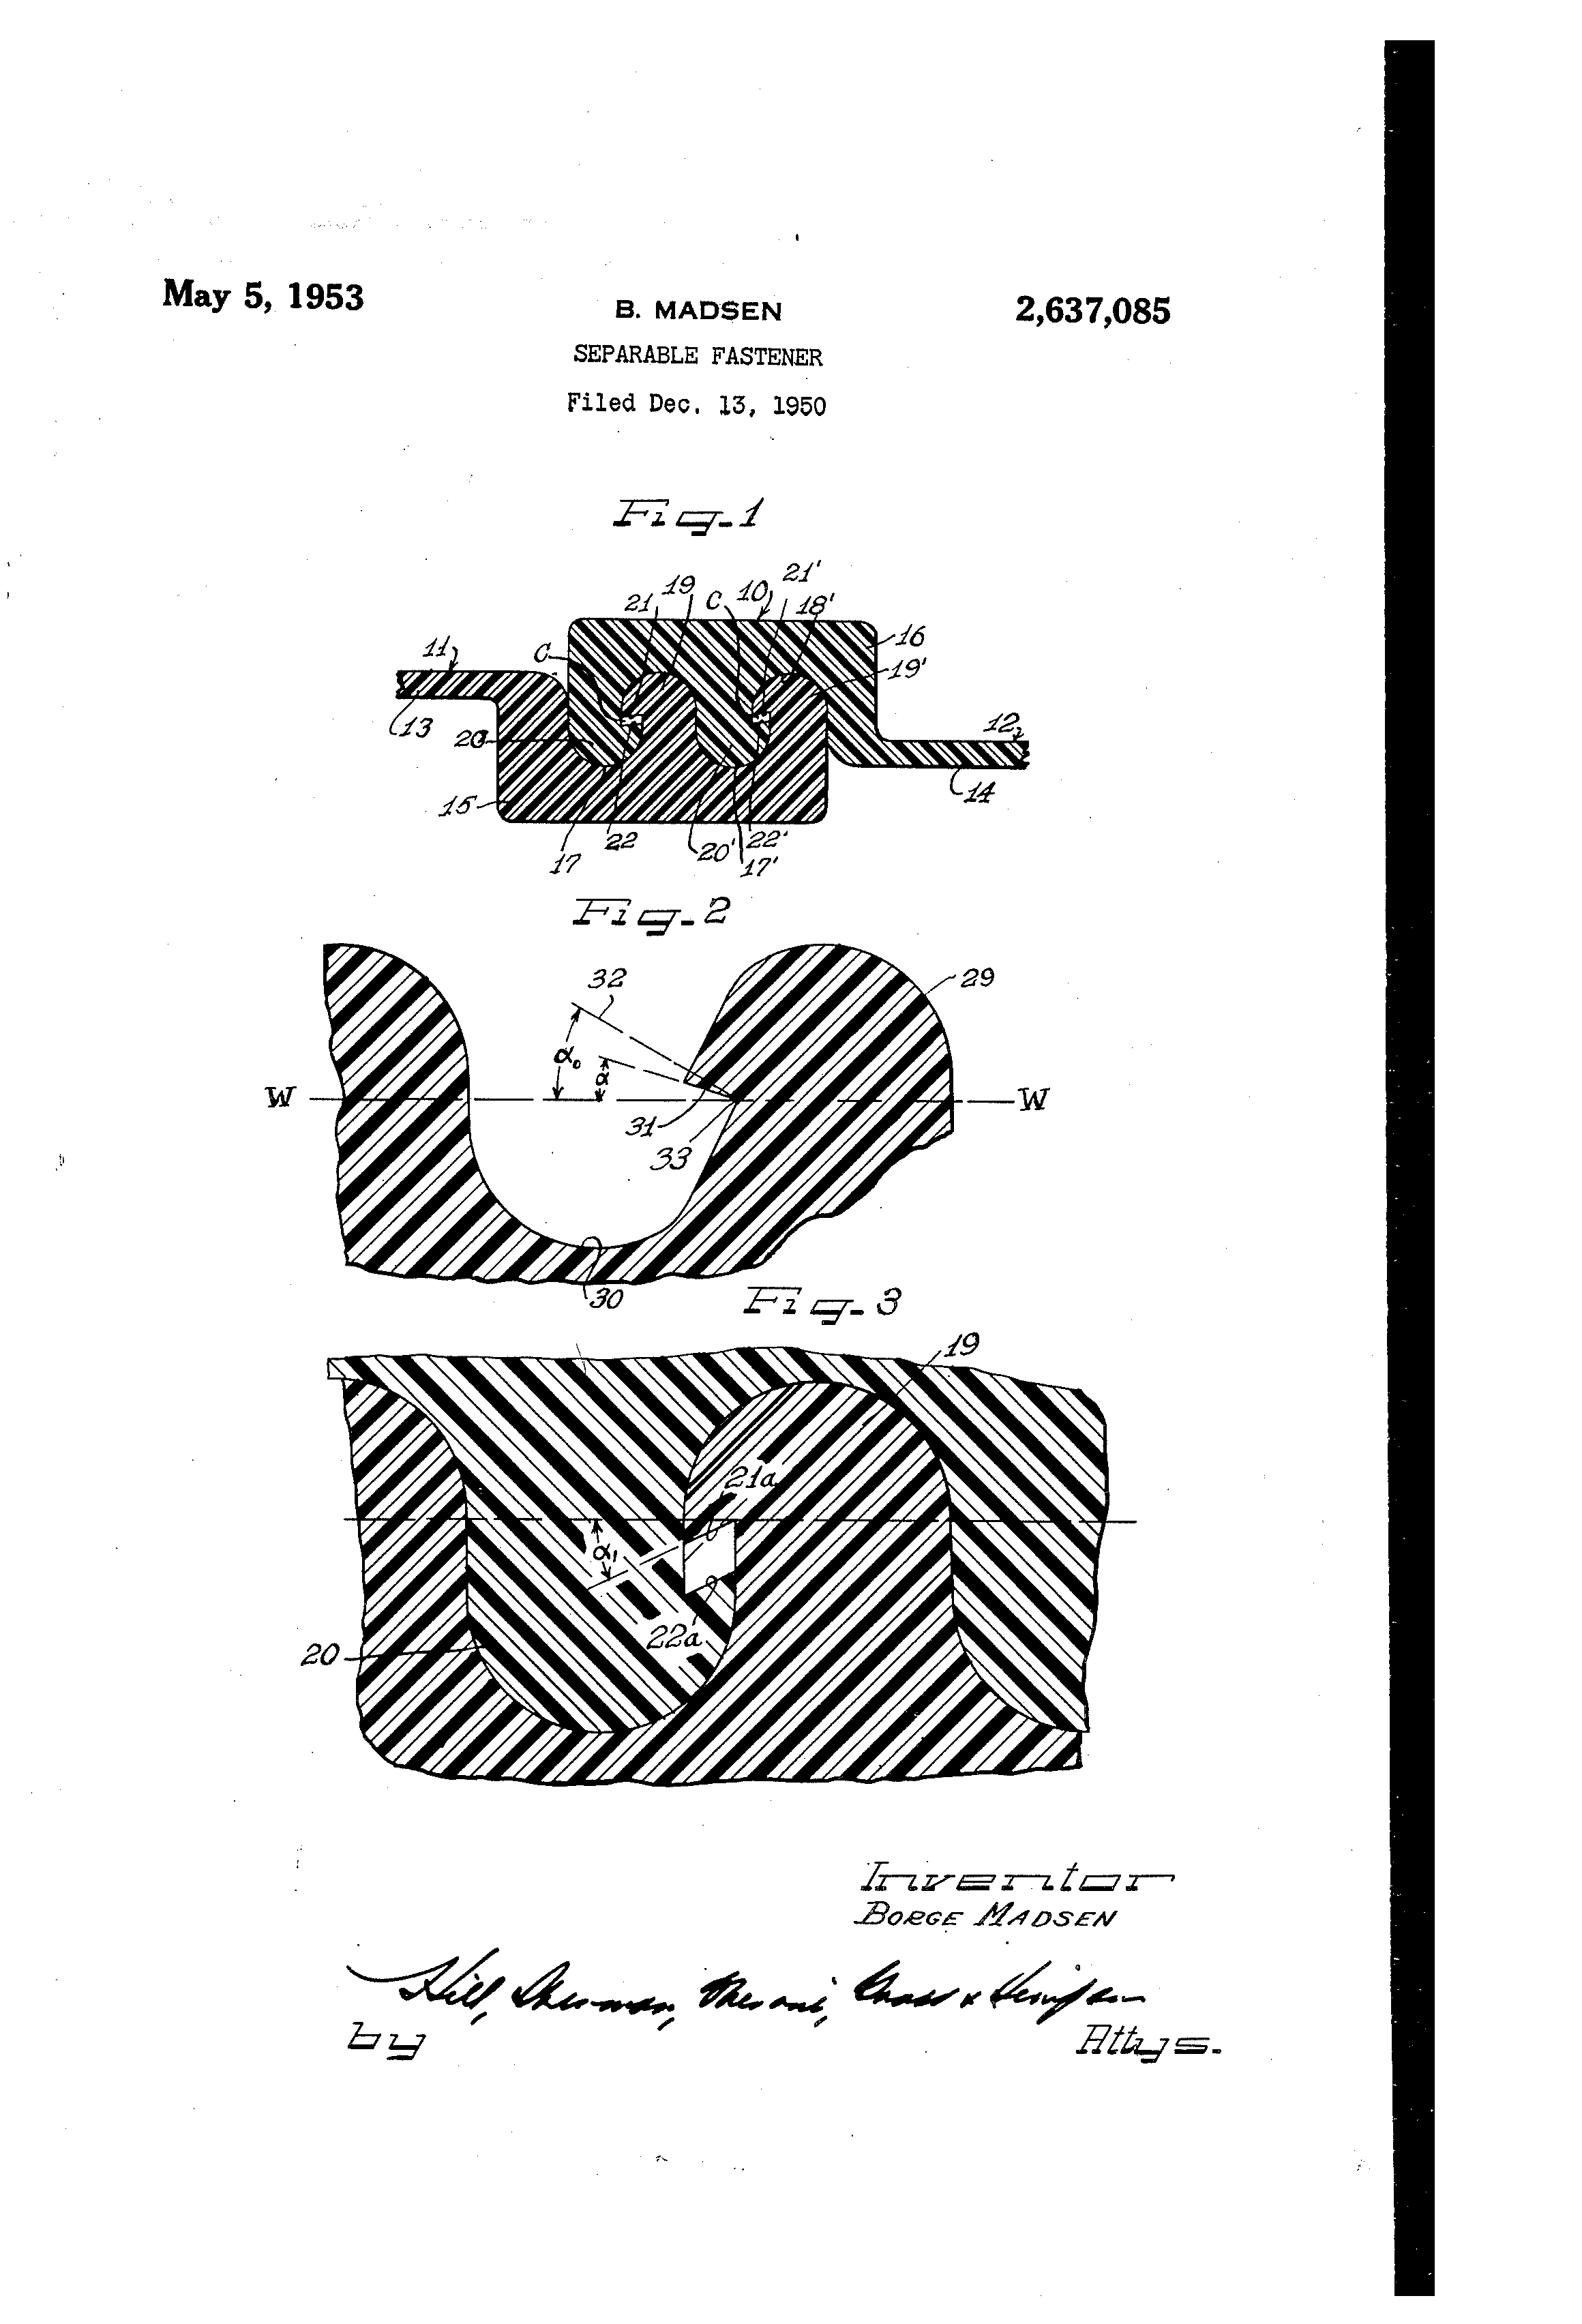 The patent diagram for grip seal bags